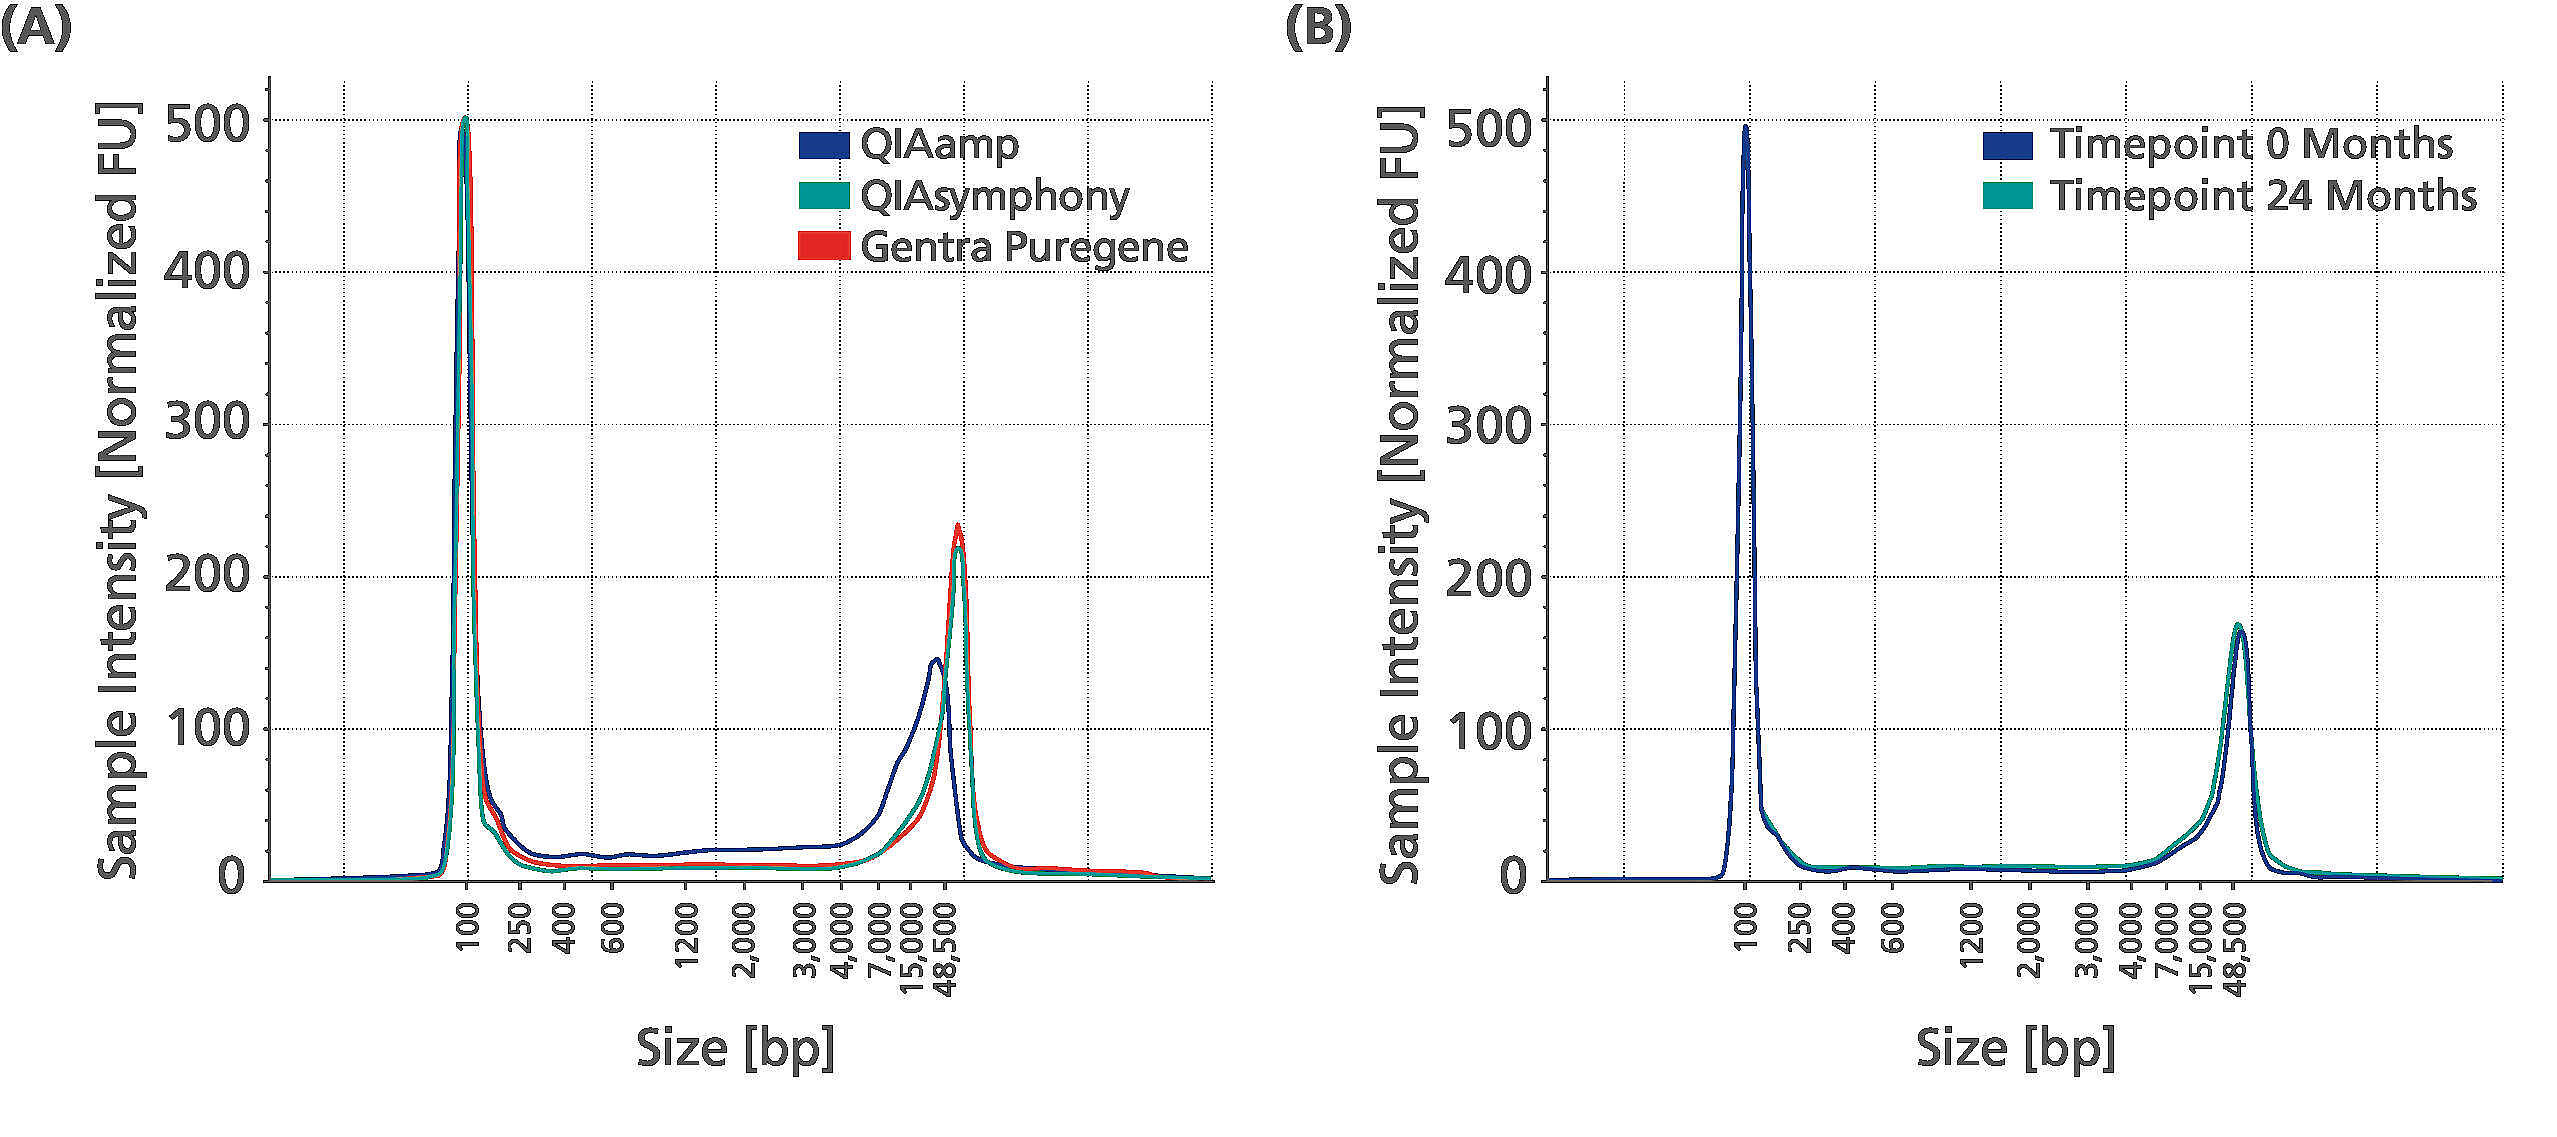 Graphs depict a representative result from one donor each. A. Saliva was collected from healthy donors into PAXgene Saliva Collectors. gDNA was extracted from the stabilized saliva using QIAamp DNA Mini Kit (blue), QIAsymphony DNA Midi Kit* (green) and Puregene Cell Kit (red). 20 ng of each of the obtained gDNA samples were analyzed with the 4200 Agilent TapeStation System using Genomic DNA Screen Tapes.  
B. Saliva was collected from healthy donors into PAXgene Saliva Collectors. gDNA was extracted from 200 µl stabilized saliva using Puregene Cell Kit directly after stabilization (Timepoint 0 months [blue]) and after 24 months storage at room temperature (15-25°C) (Timepoint 24 months [green]). 20 ng of the obtained gDNA samples were analyzed with the 4200 Agilent TapeStation System using Genomic DNA Screen Tapes. 
* QIAGEN QIAsymphony DNA Midi Kit is not available in all countries. For further details please contact QIAGEN Technical Service 